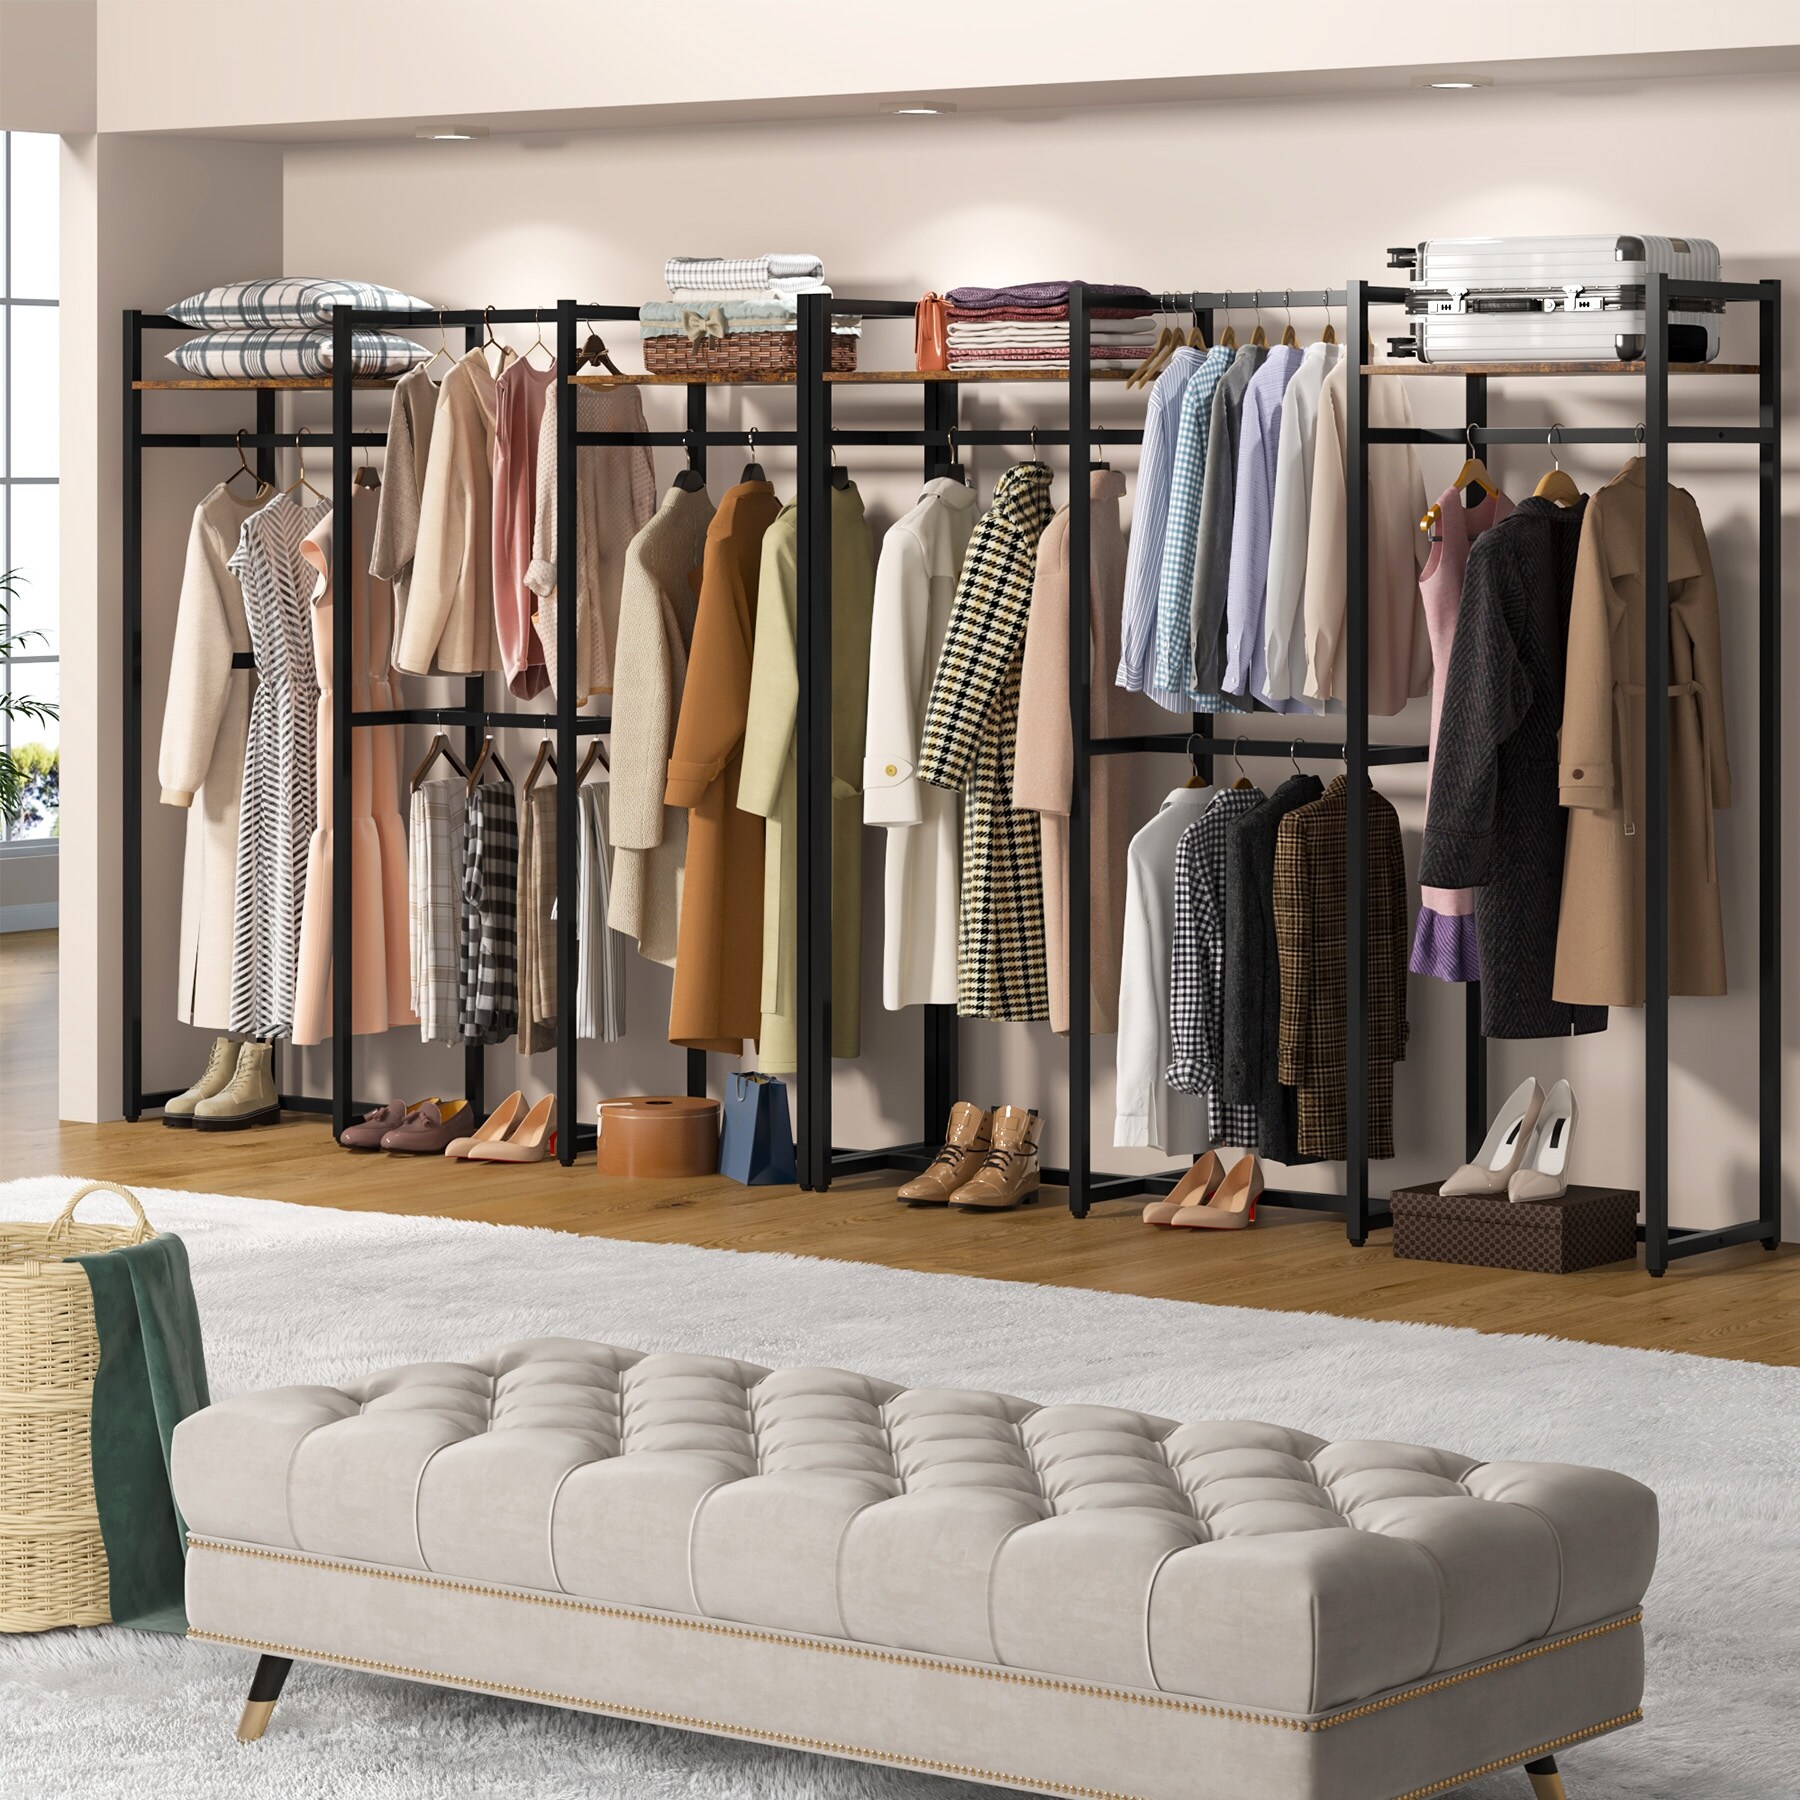 https://ak1.ostkcdn.com/images/products/is/images/direct/c50b6b7e5ee8196e0b7cc661a992c5d9508c40a0/Free-Standing-Closet-Organizer-with-Hanging-Rods%2C-Garment-Rack-Heavy-Duty-Clothes-Rack-with-Storage-Shelves%2C-Max-Load-500LBS.jpg